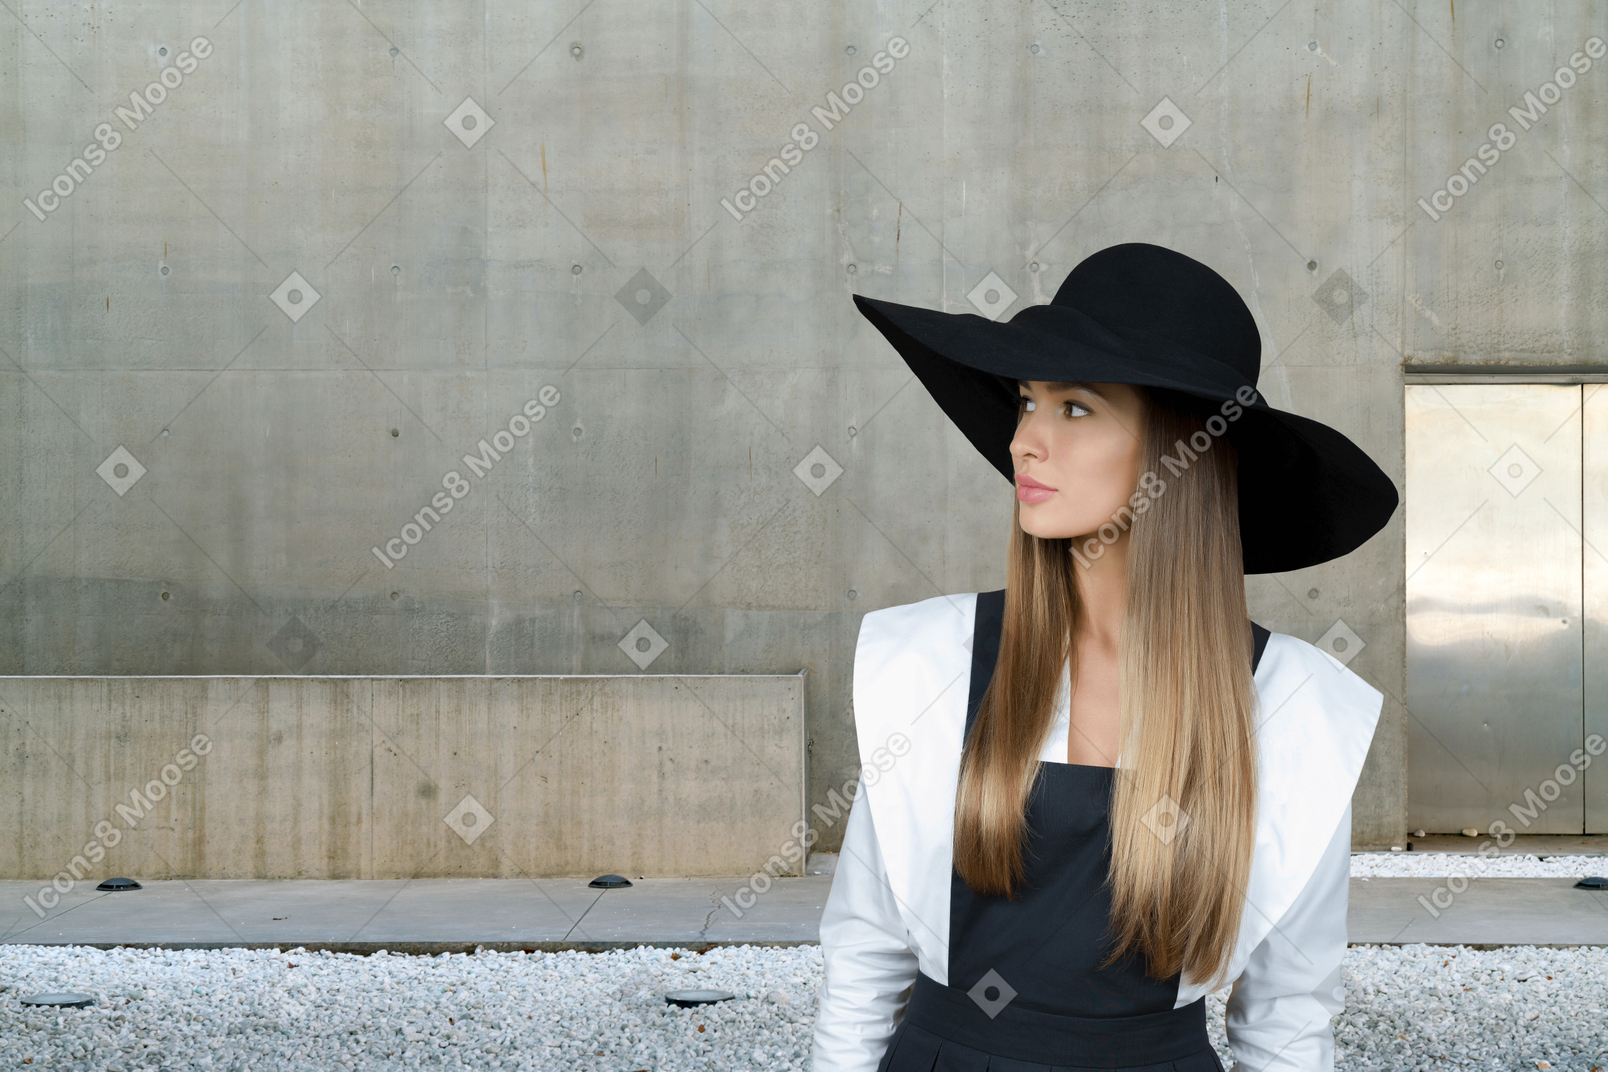 A young woman in a black hat and a white shirt sits in front of a wall